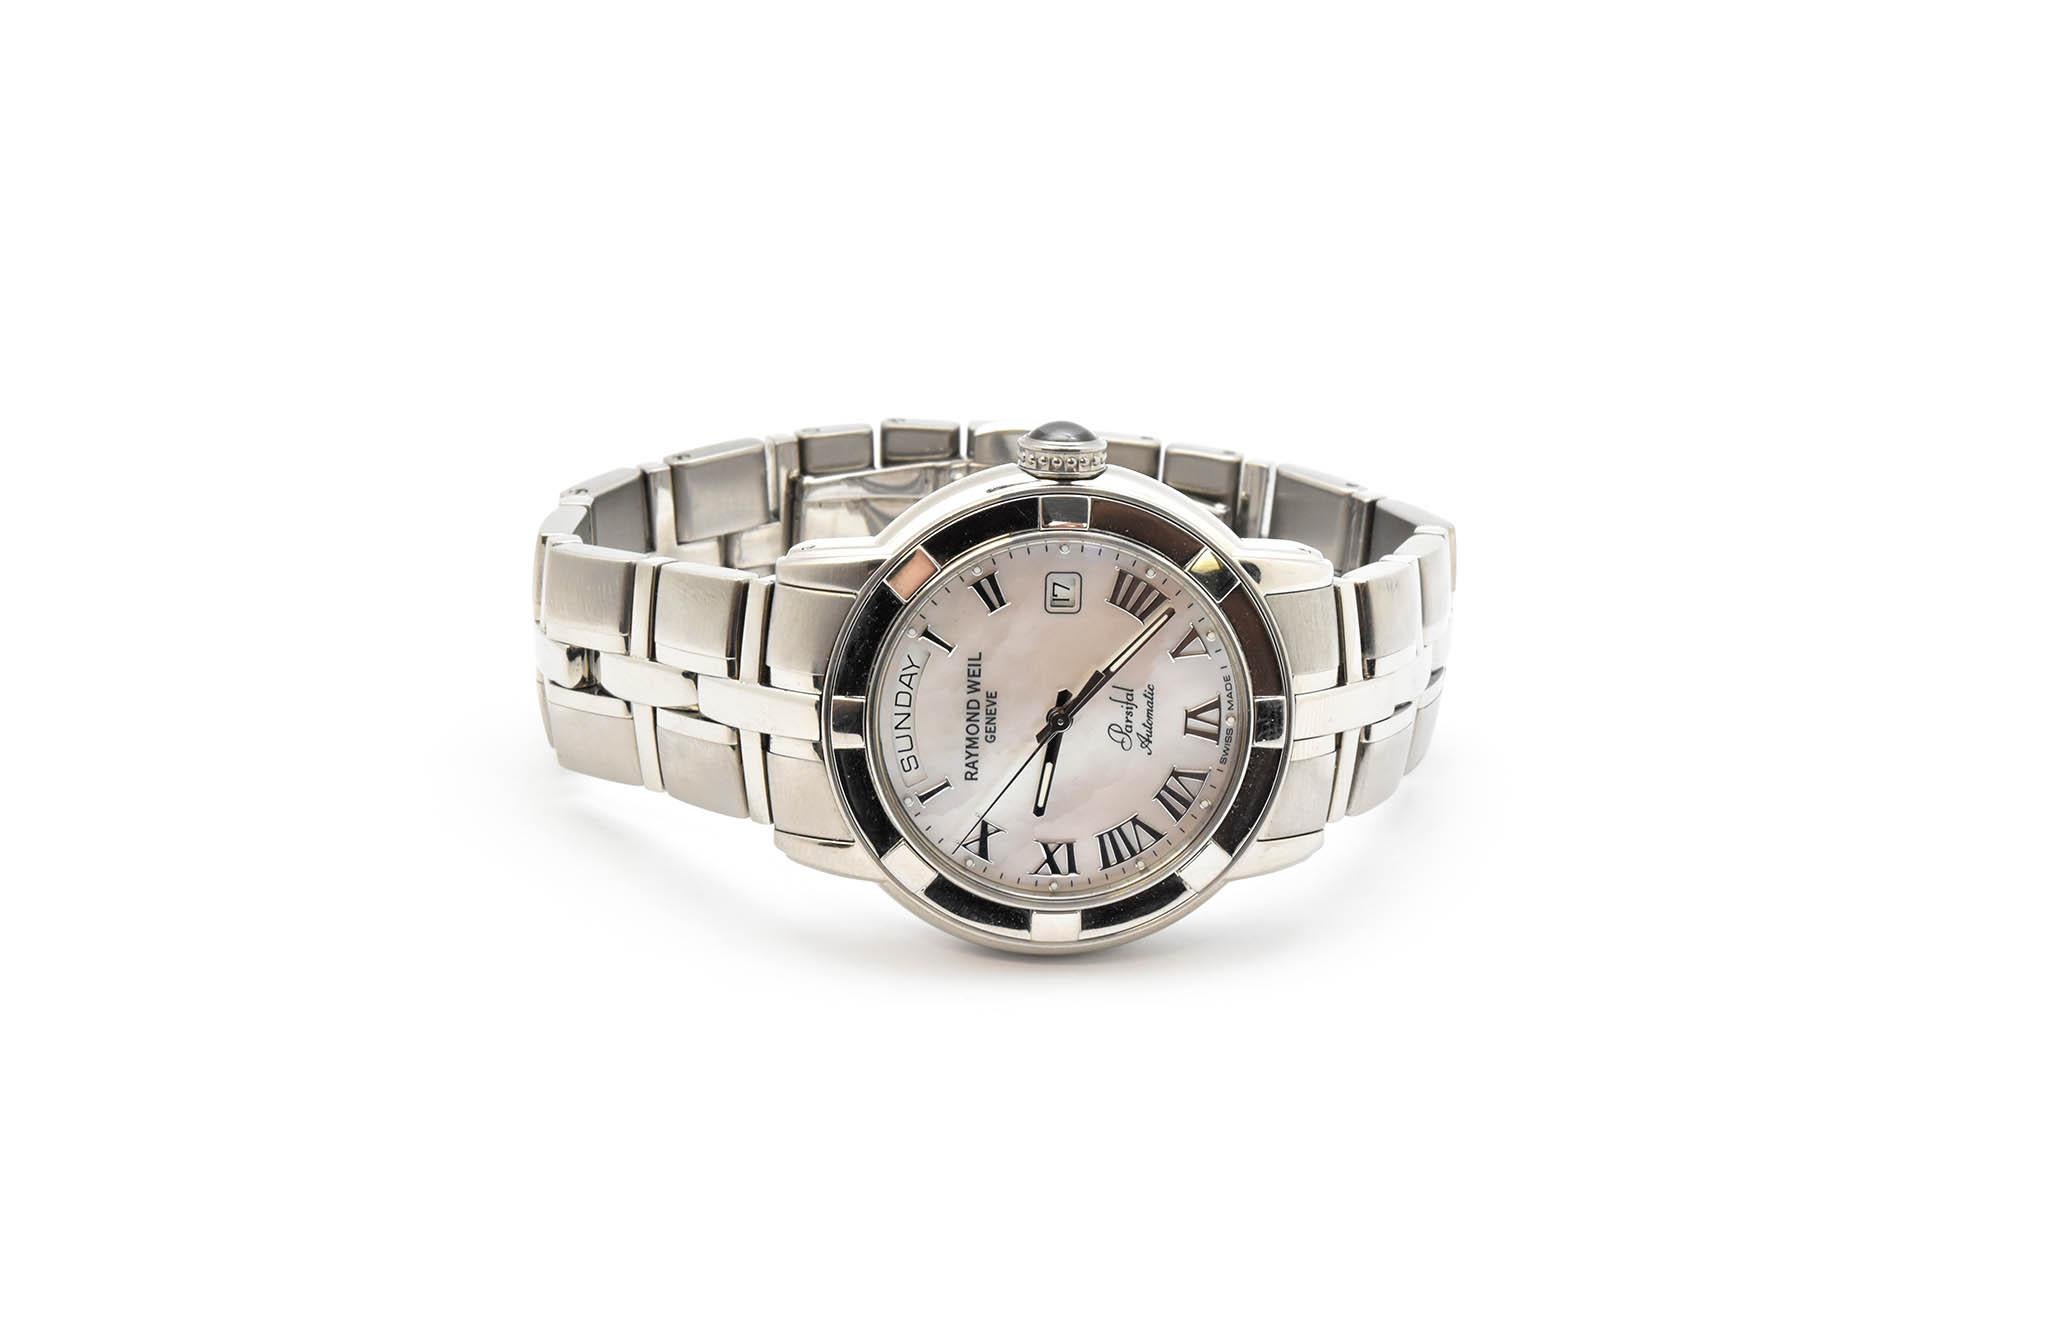 Movement: automatic
Function: hours, minutes, sweep seconds, date, day
Case: 40mm stainless steel case, sapphire crystal, exhibition case back
Band: steel bracelet with steel deployment clasp fits up to a 7.5-inch wrist
Dial: mother of pearl dial,